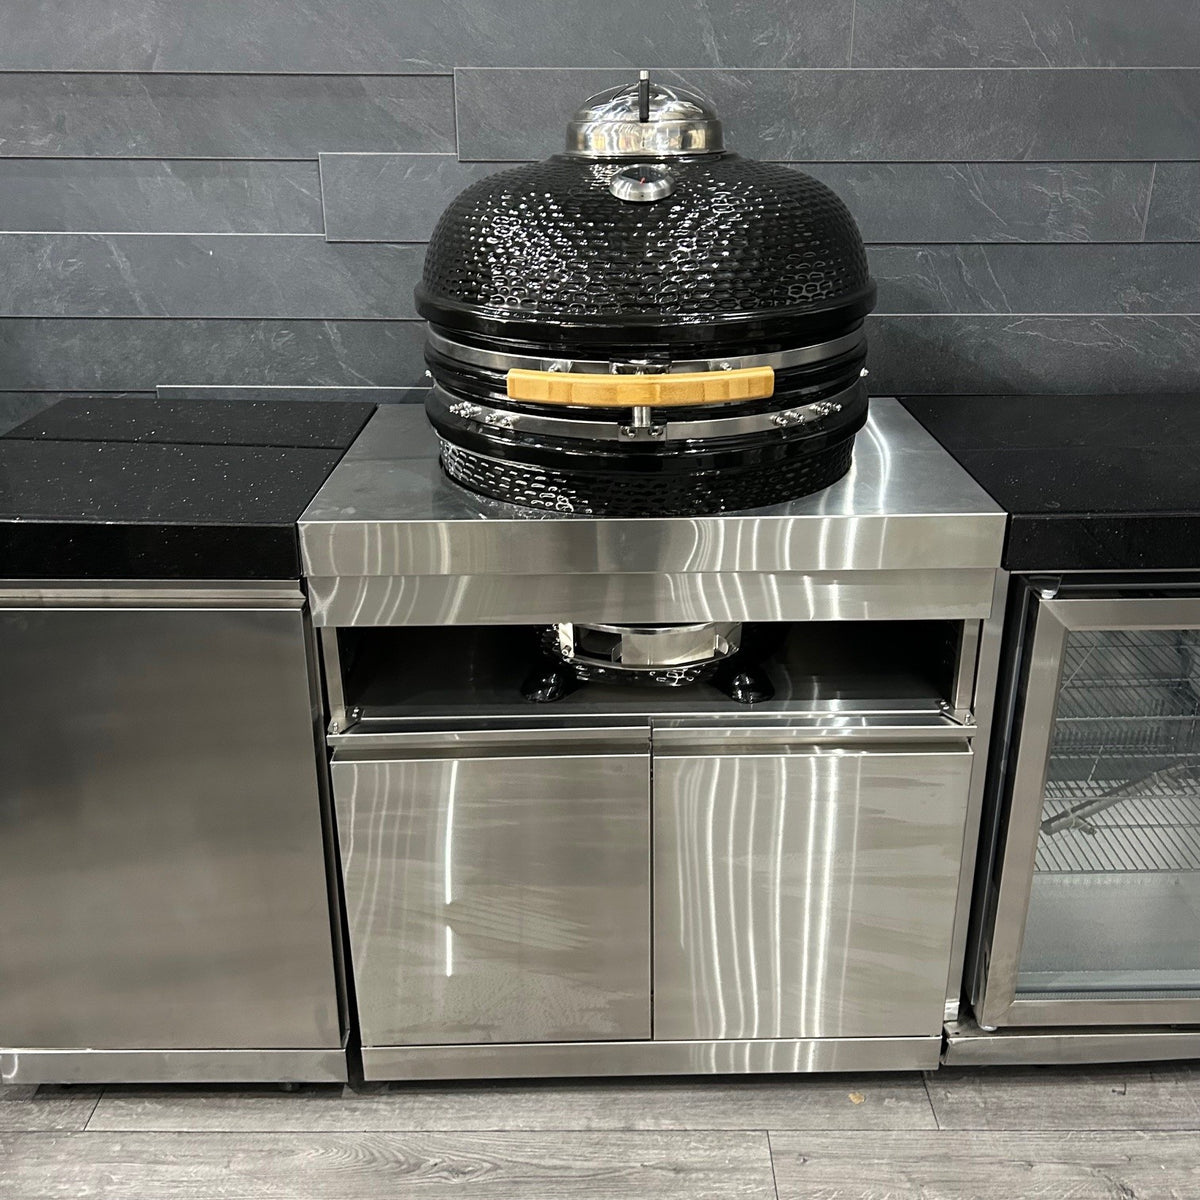 Ex Display Draco Grills Outdoor Kitchen Stainless Steel Black Kamado Egg BBQ Unit, Double Fridge Unit and Single Cupboard